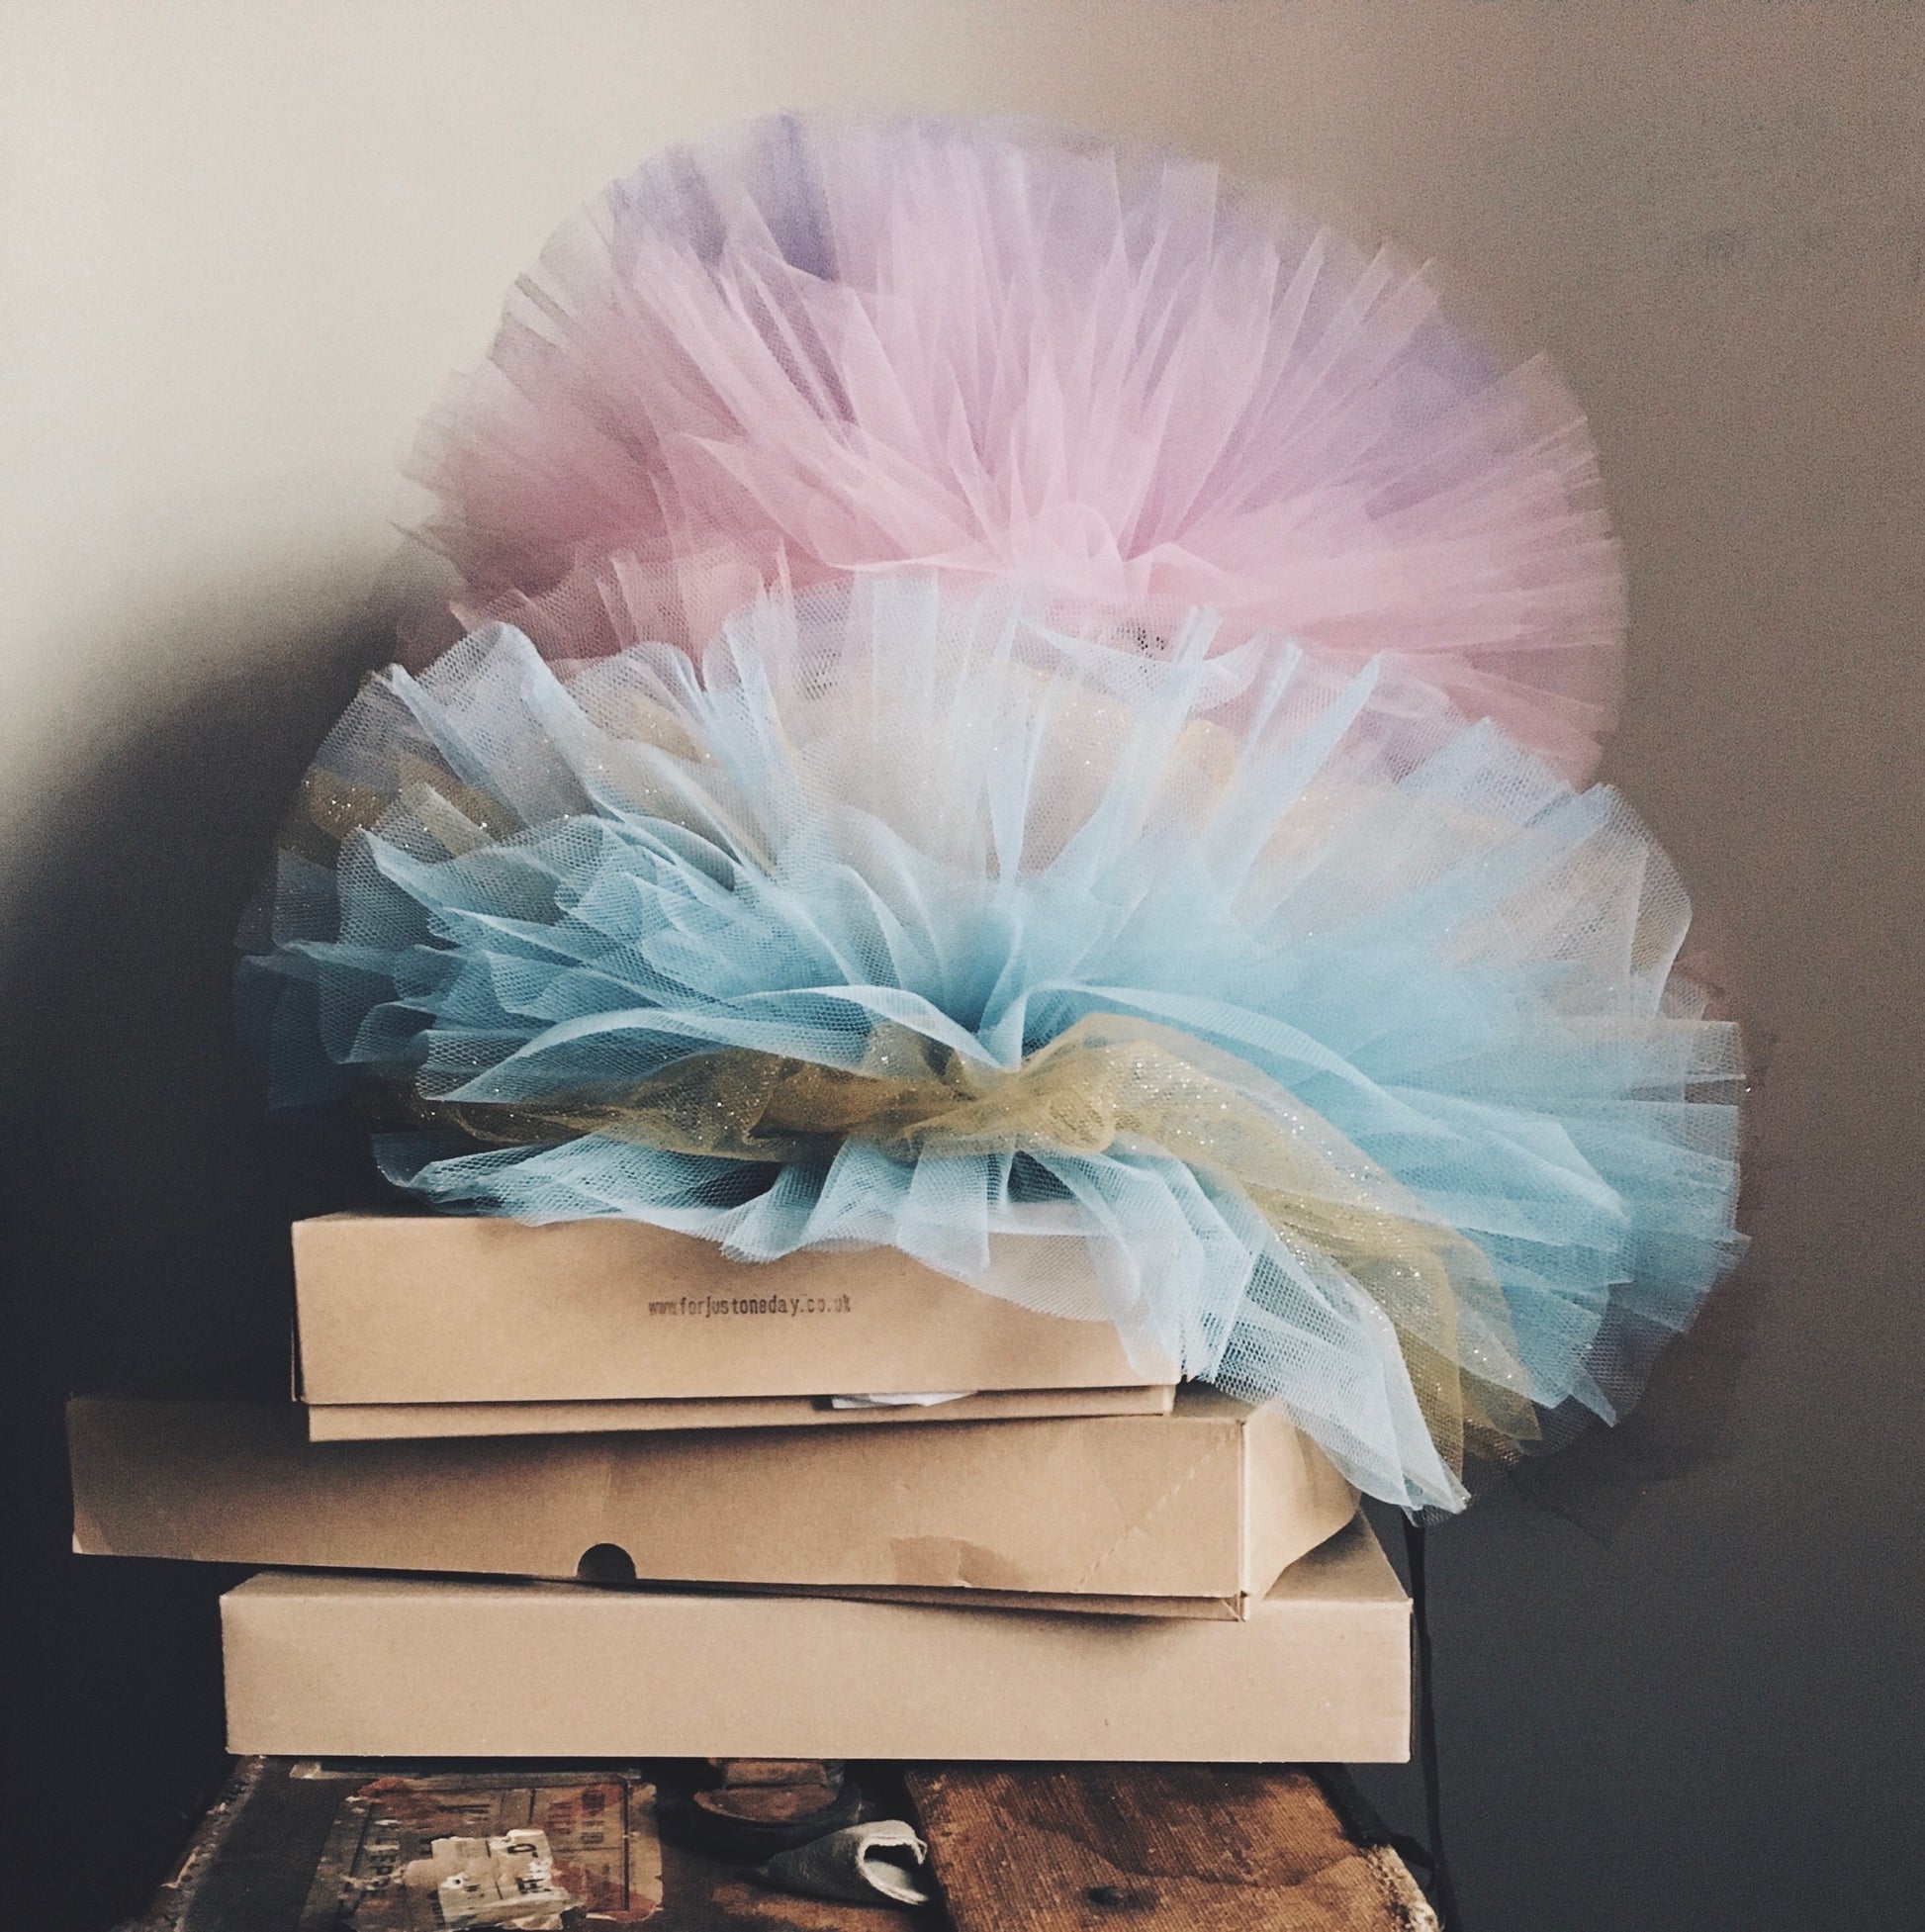 A pile of airy Tulle clown collars on brown packaging boxes